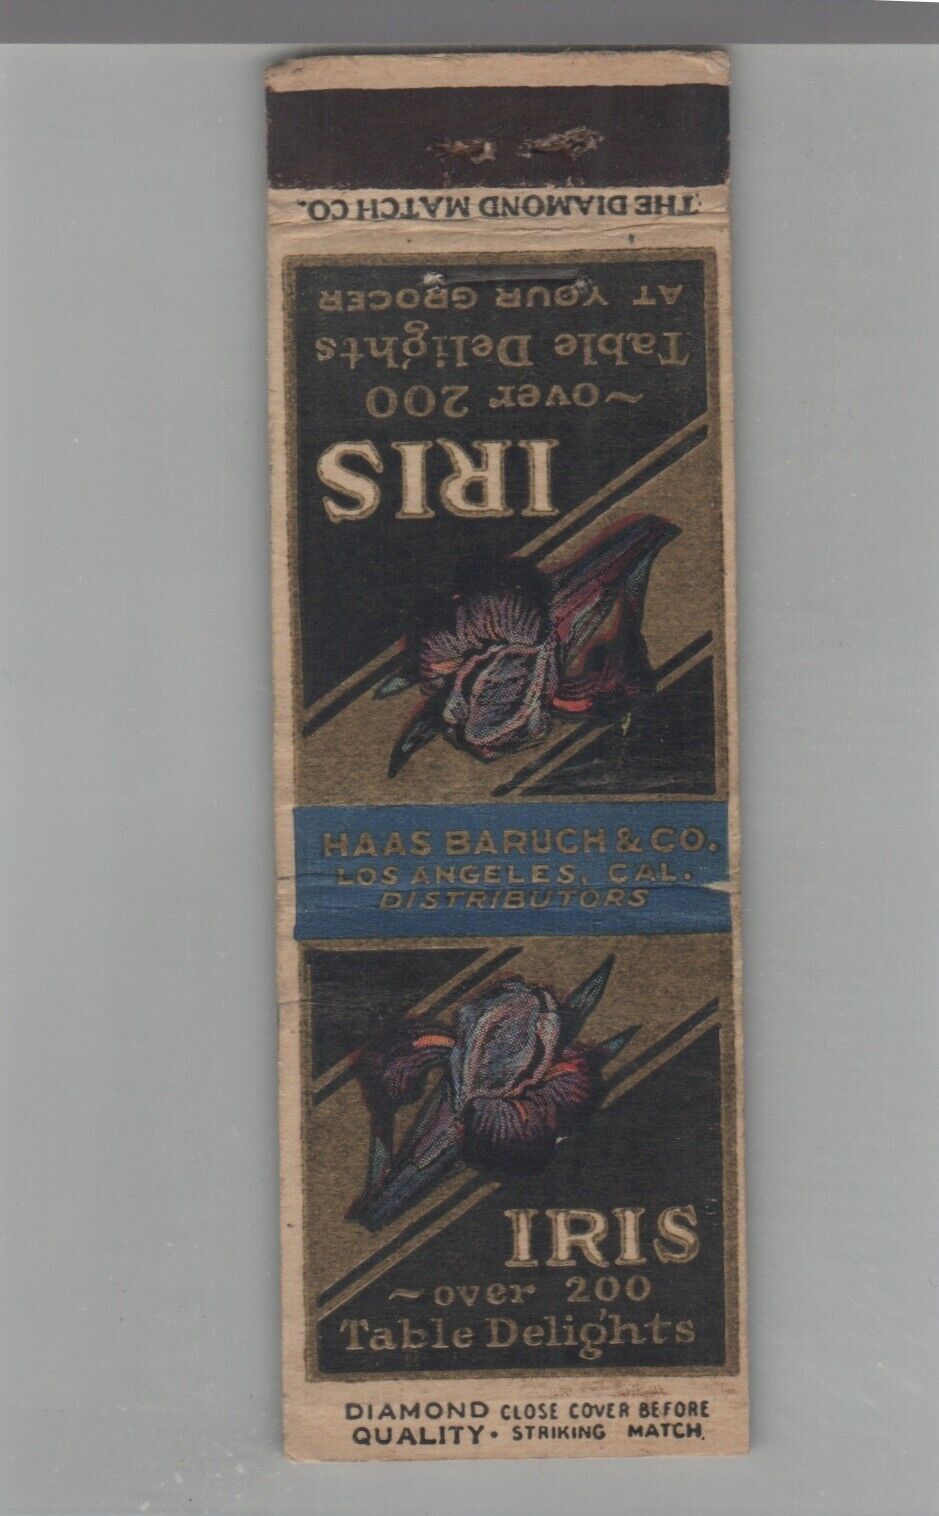 1930s Matchbook Cover Diamond Quality Haas Baruch & Co Iris Table Delights